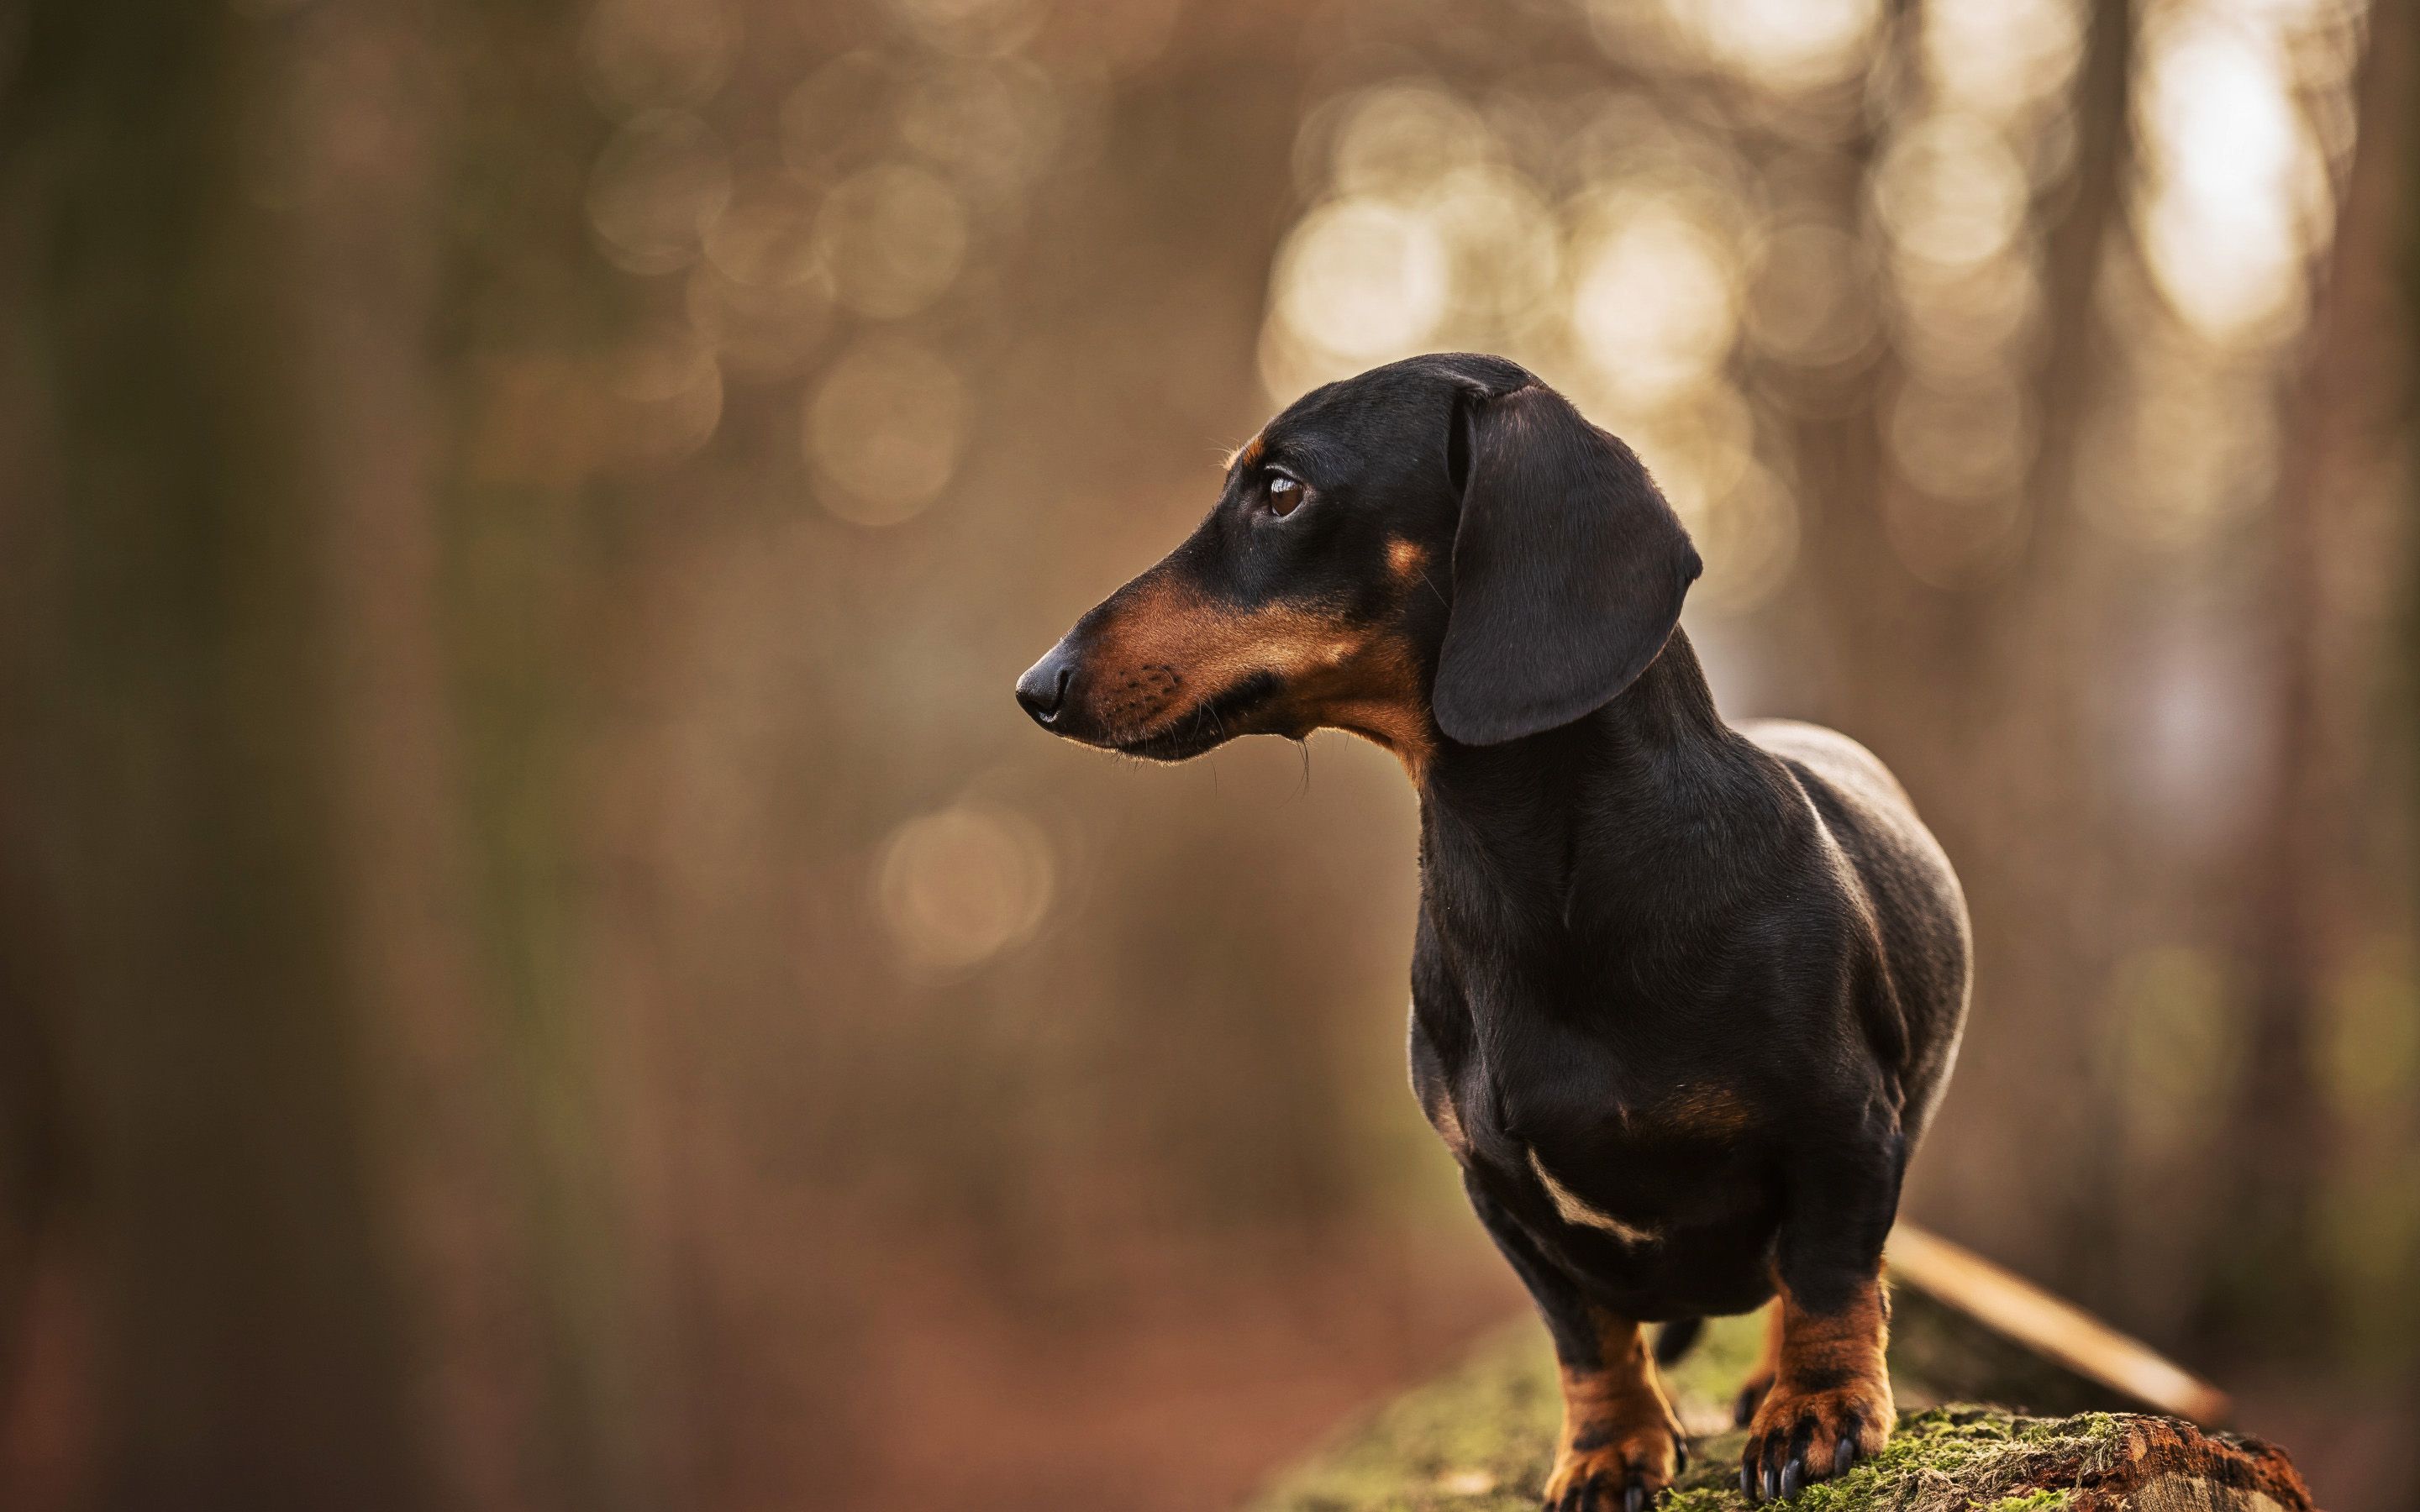 Download wallpaper Dachshund, autumn, dogs, bokeh, black dachshund, forest, pets, cute animals, Dachshund Dog for desktop with resolution 2880x1800. High Quality HD picture wallpaper